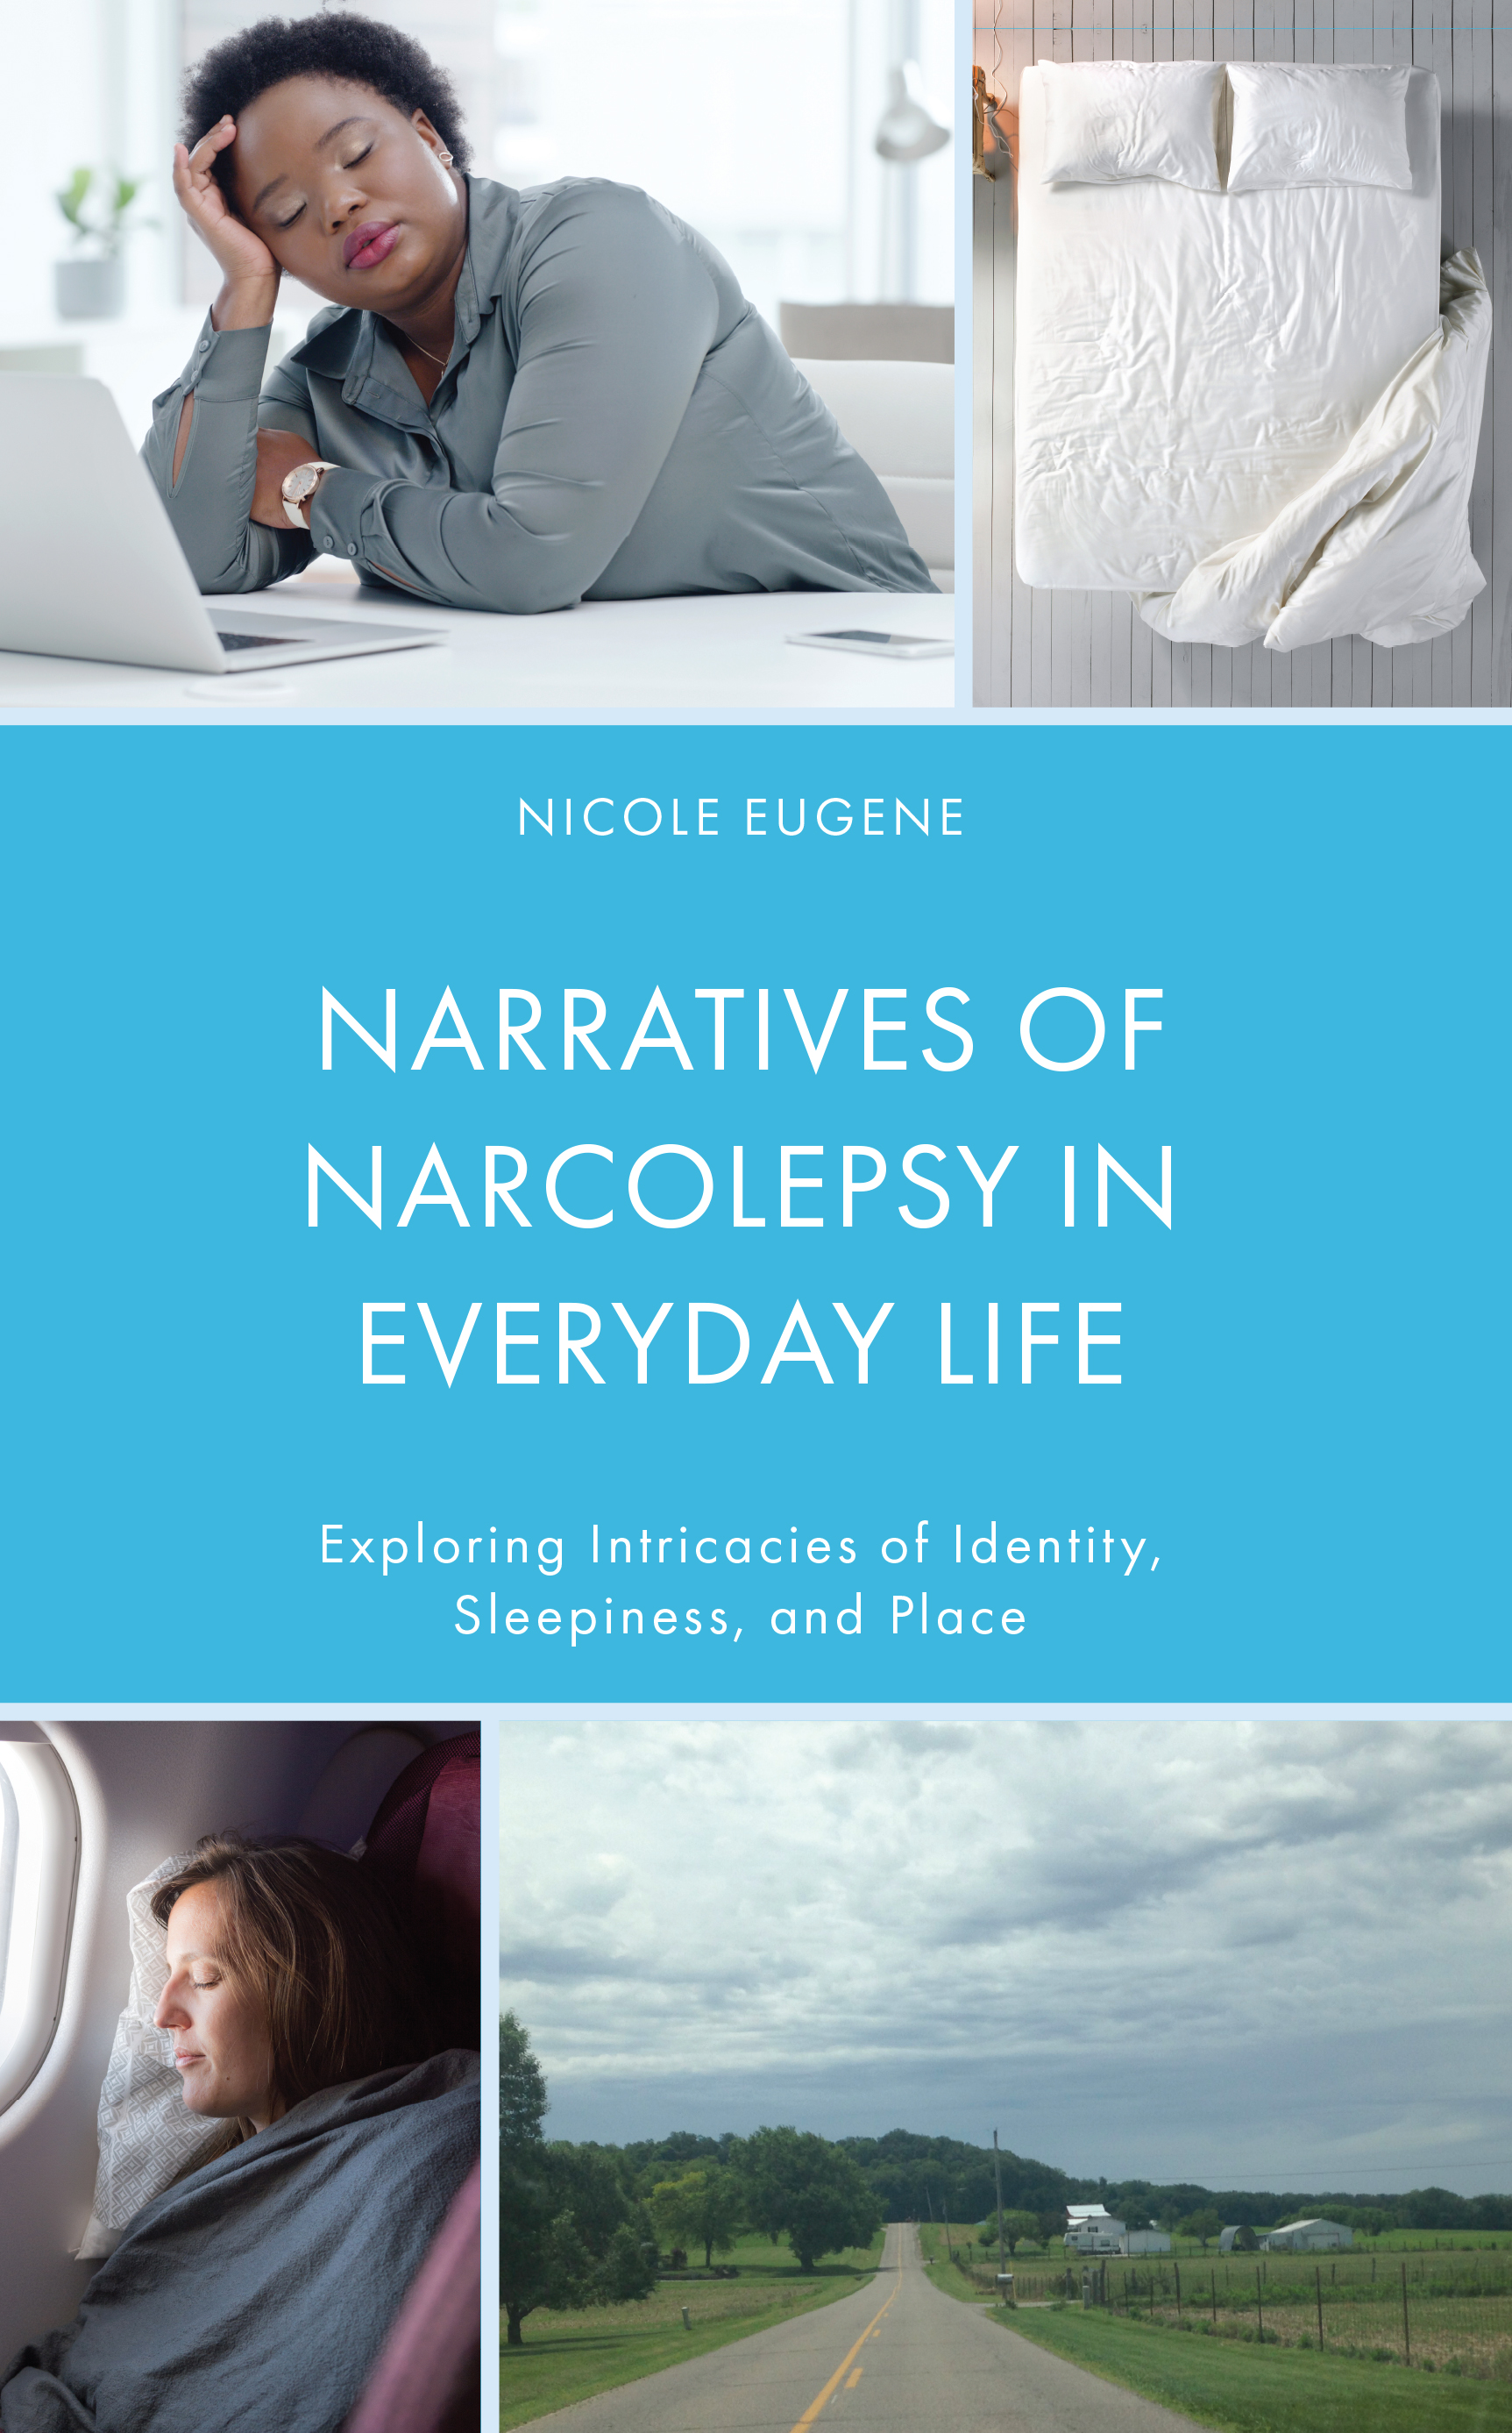 Narratives of Narcolepsy in Everyday Life: Exploring Intricacies of Identity, Sleepiness, and Place